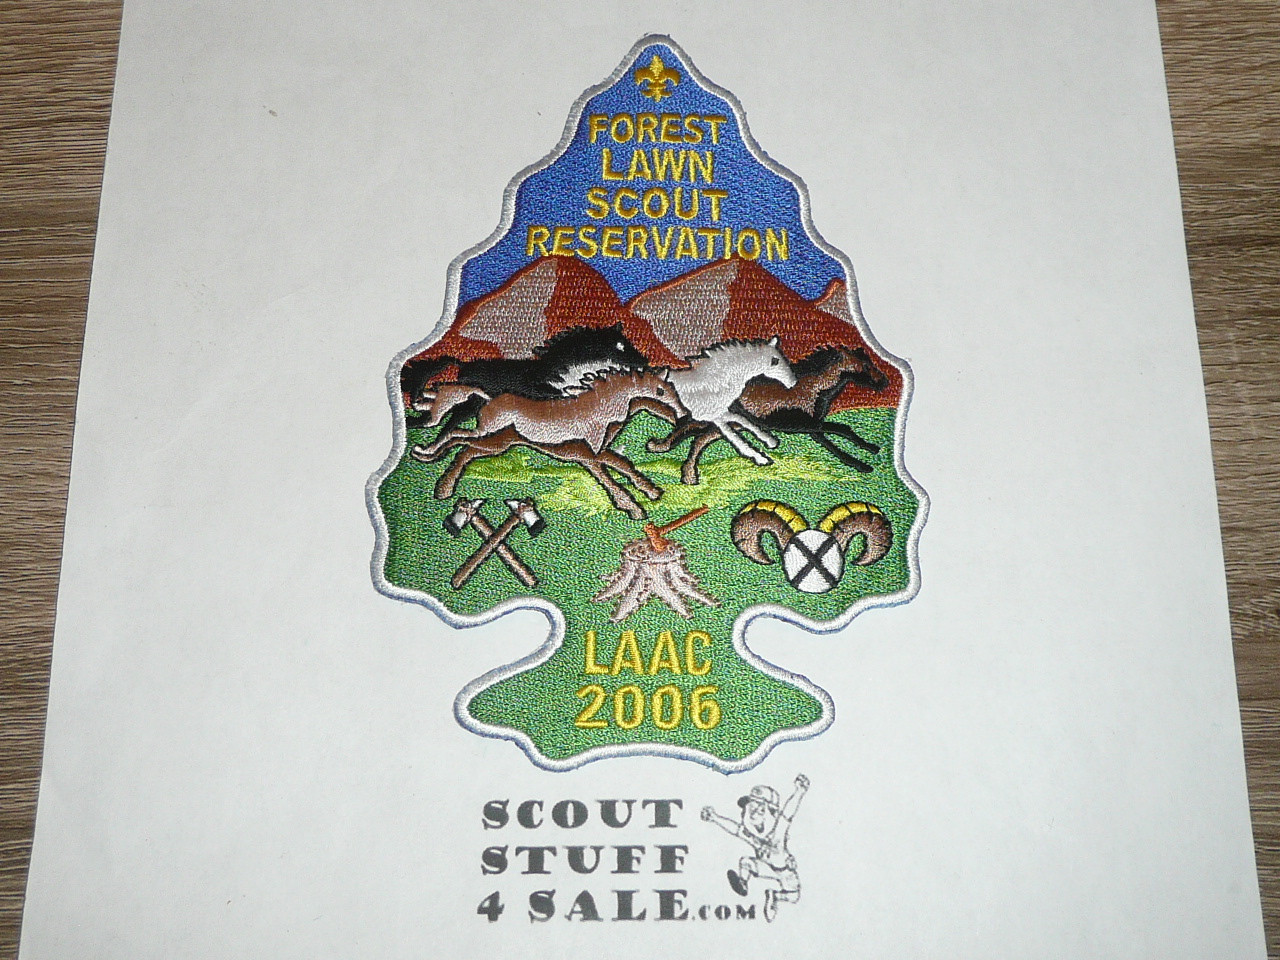 Forest Lawn Scout Reservation CAMPING COMMITTEE Jacket Patch, LAAC, 2006